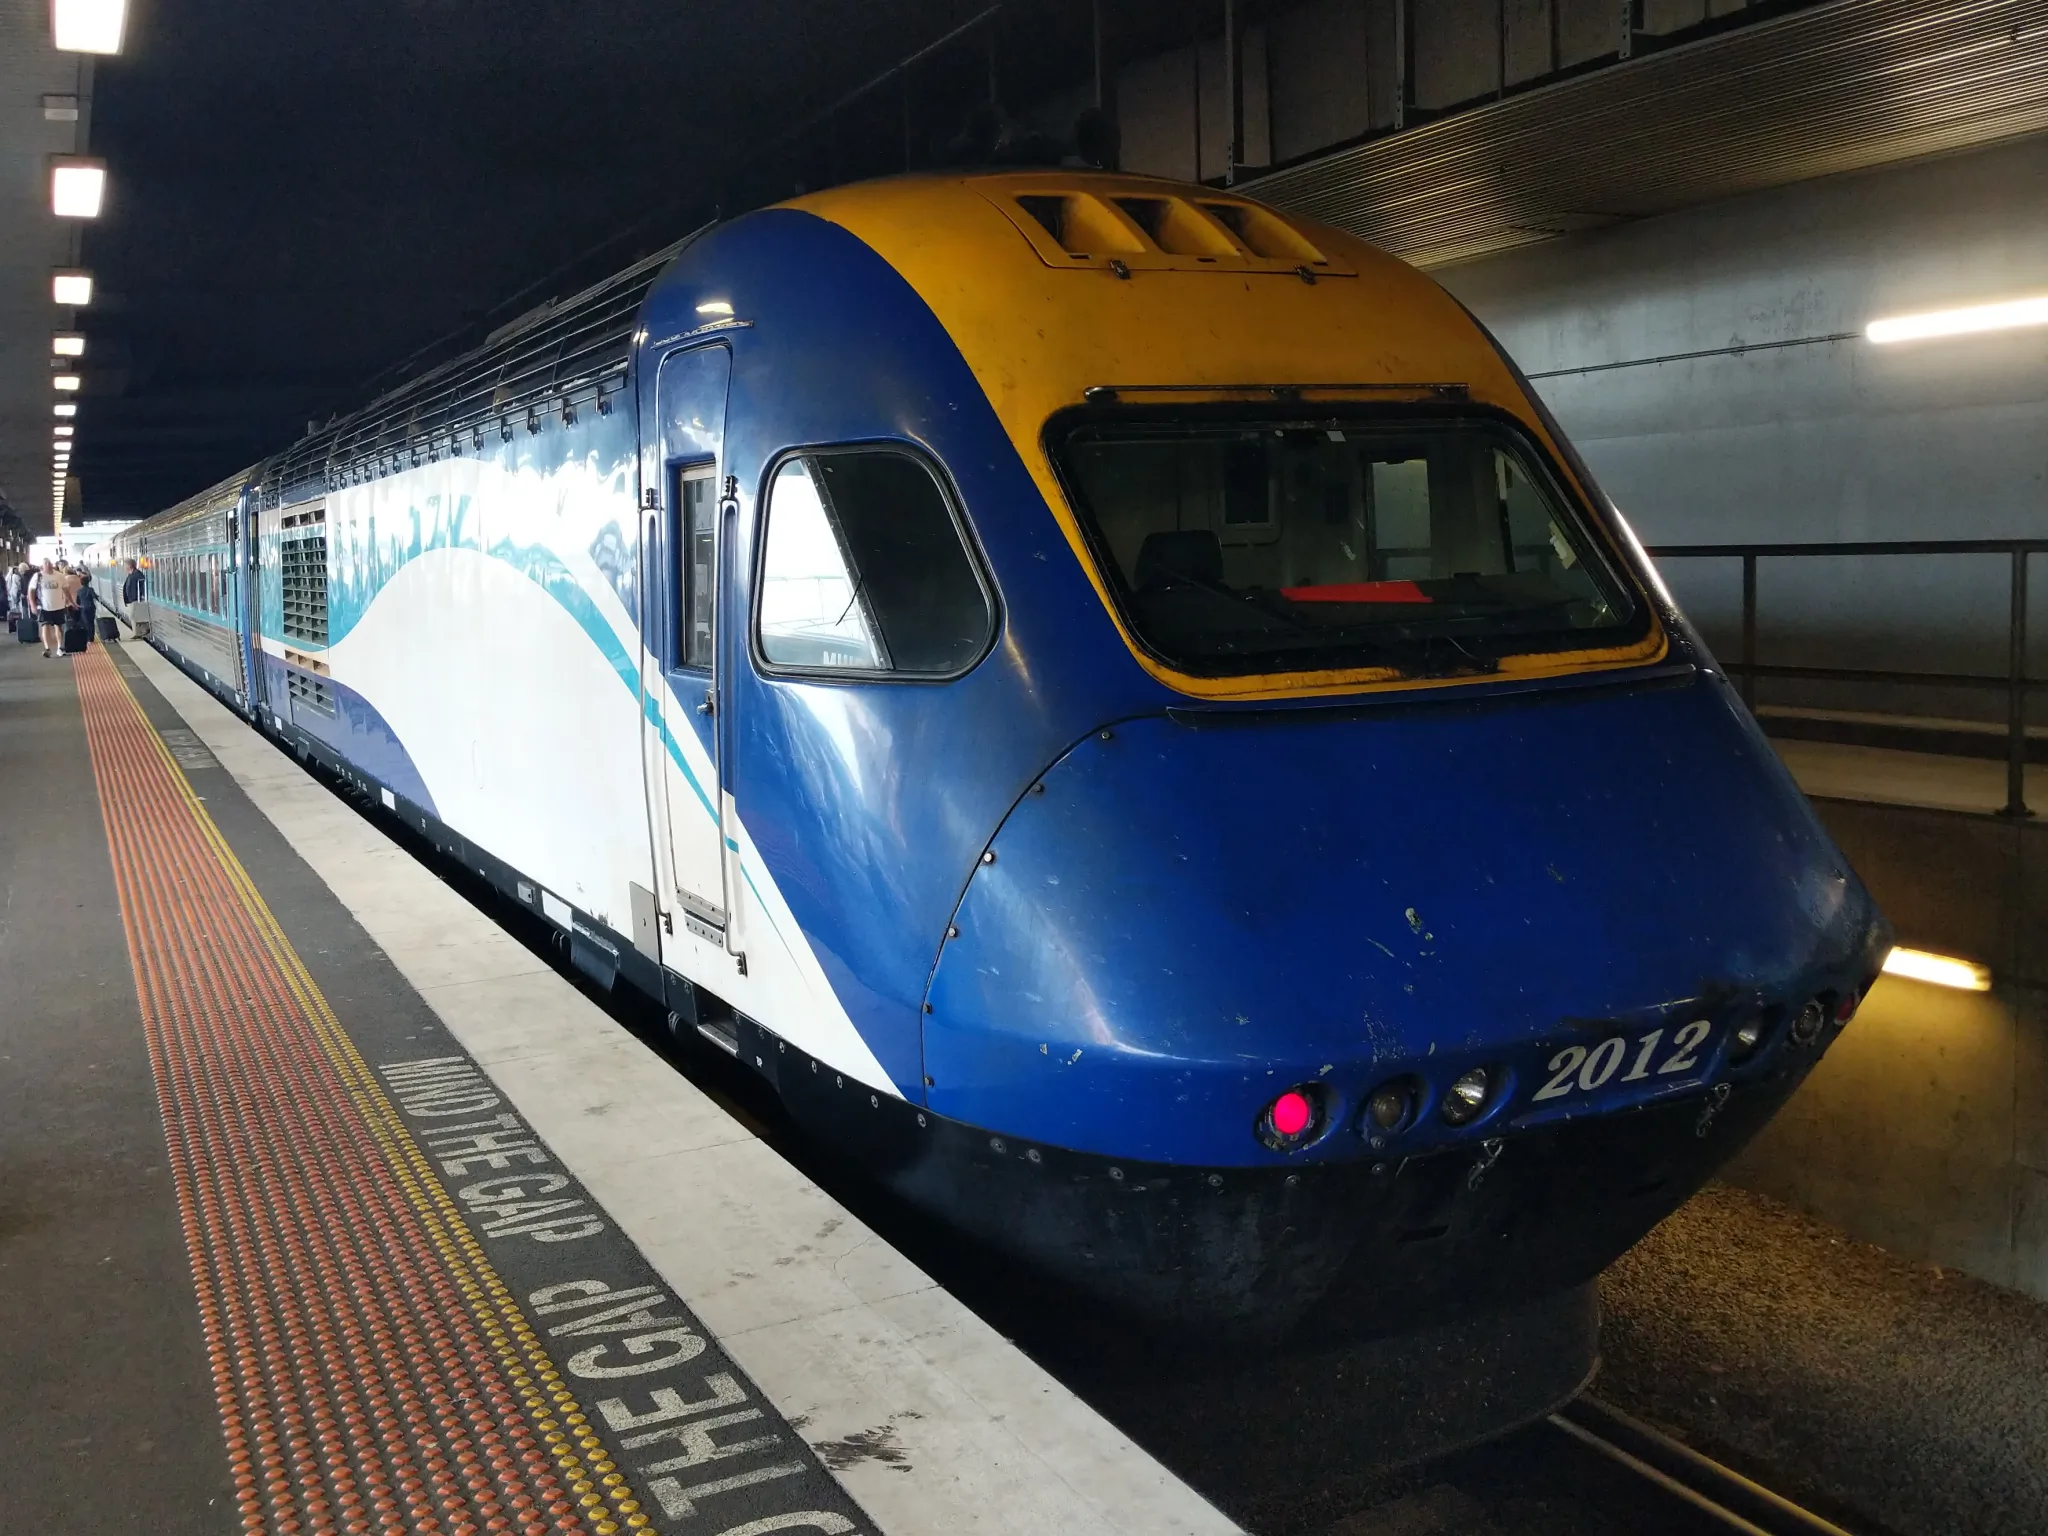 The power car of an XPT train. It looks very similar to an InterCity 125.